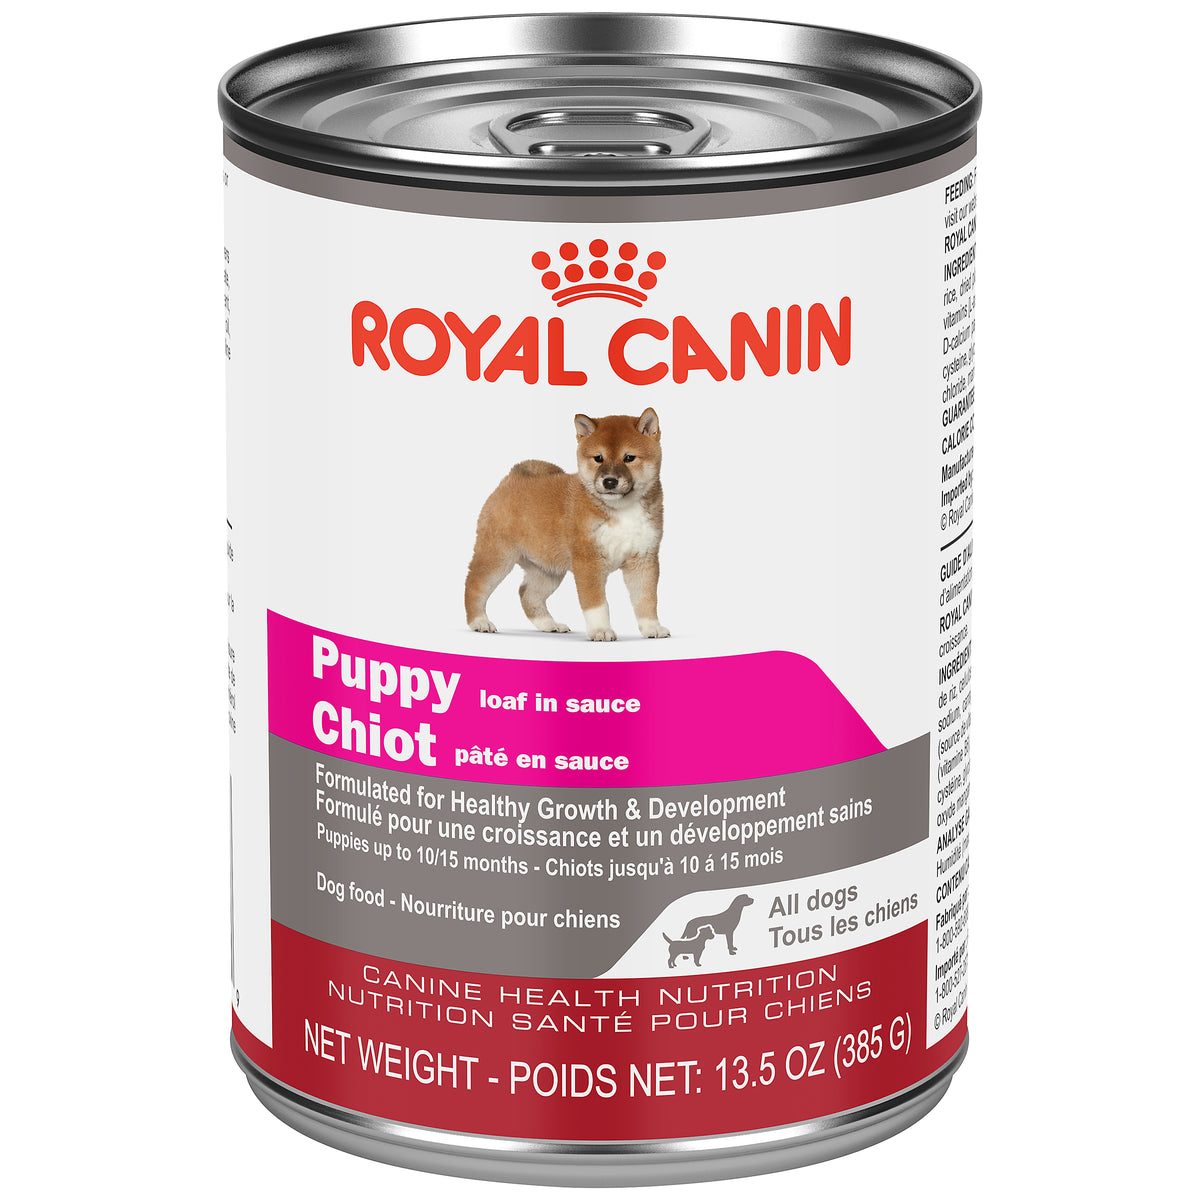 Royal Canin Puppy Canned Dog Food (385g)